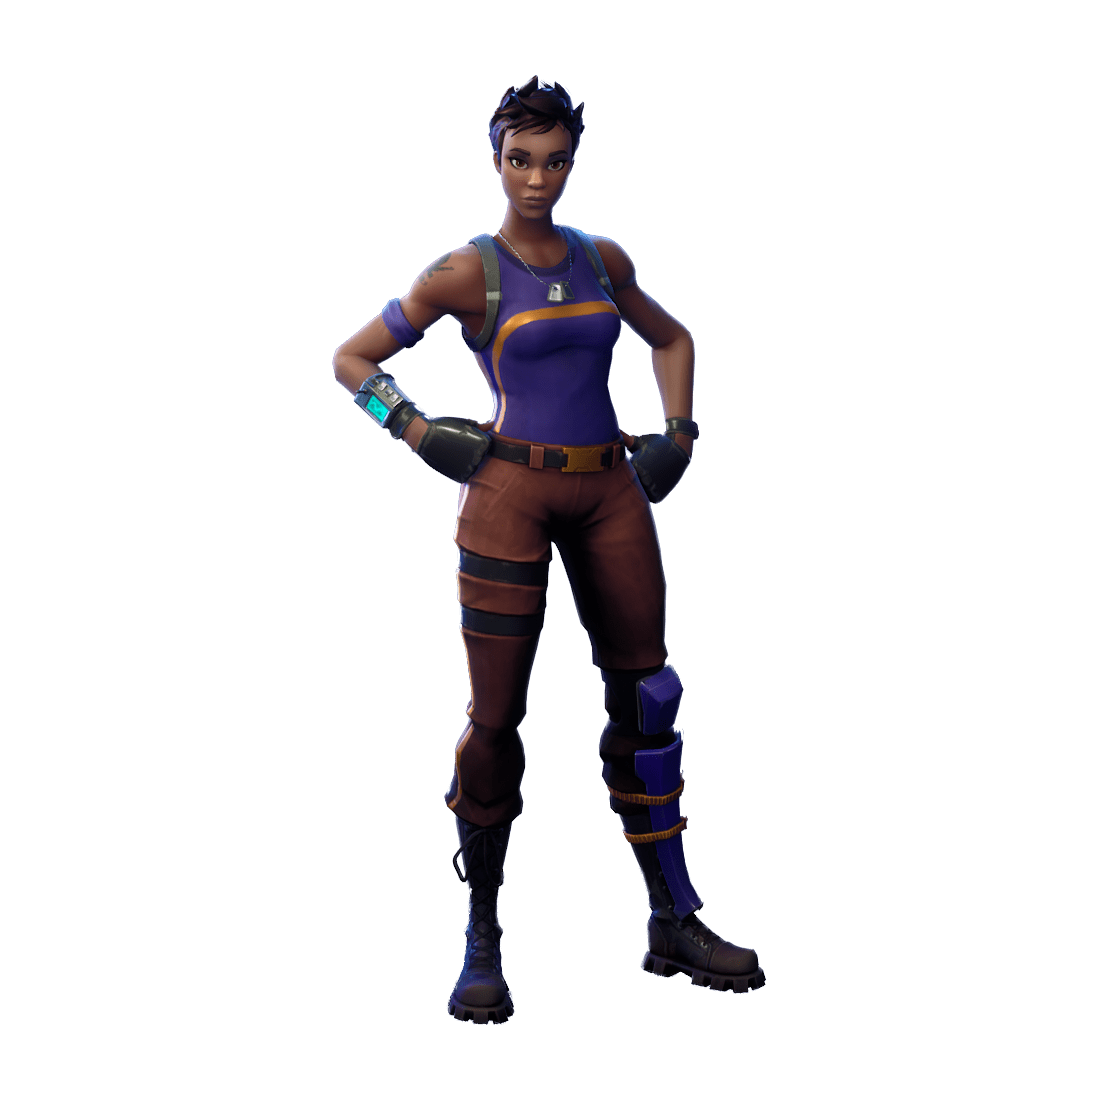 Tactics Officer Fortnite Outfit Skin How to Get + Updates. Fortnite